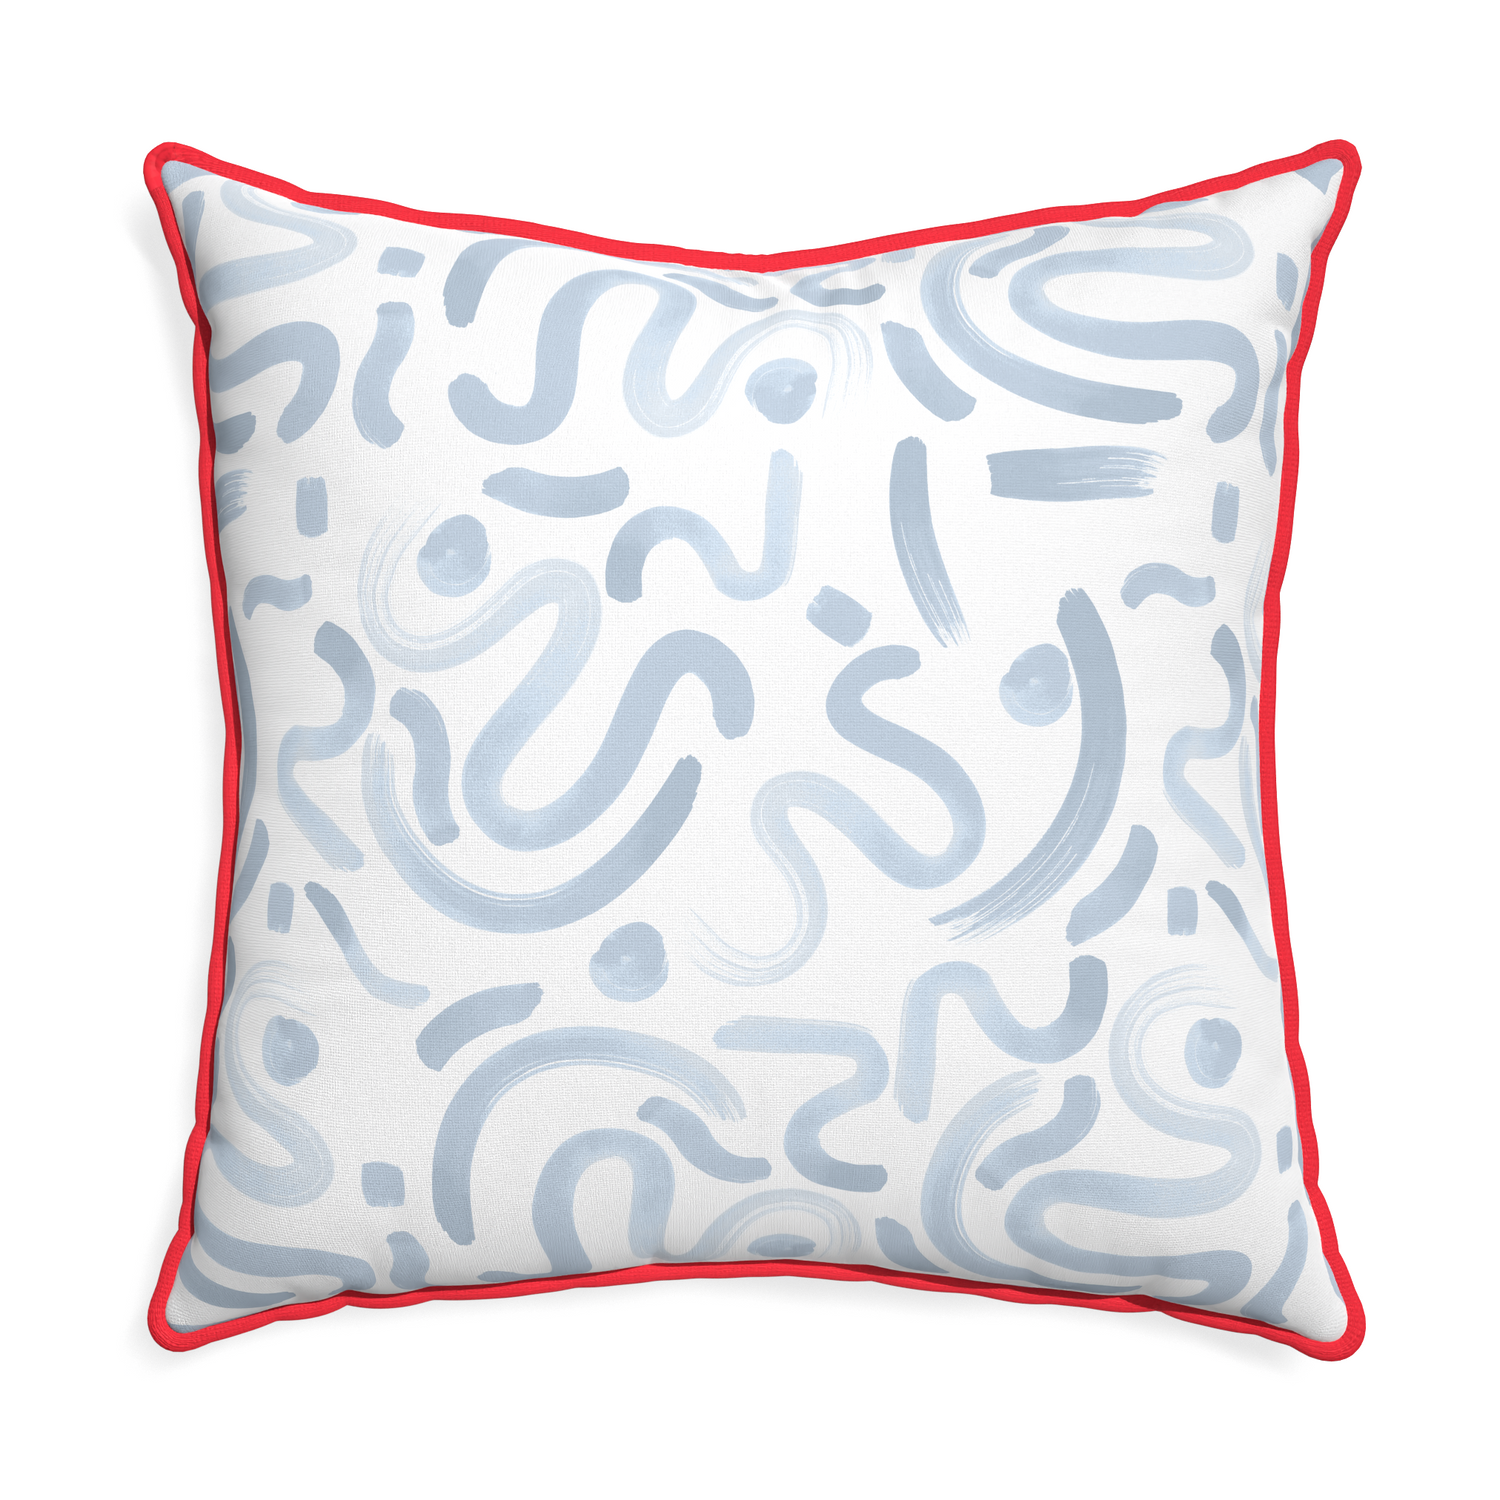 Euro-sham hockney sky custom pillow with cherry piping on white background